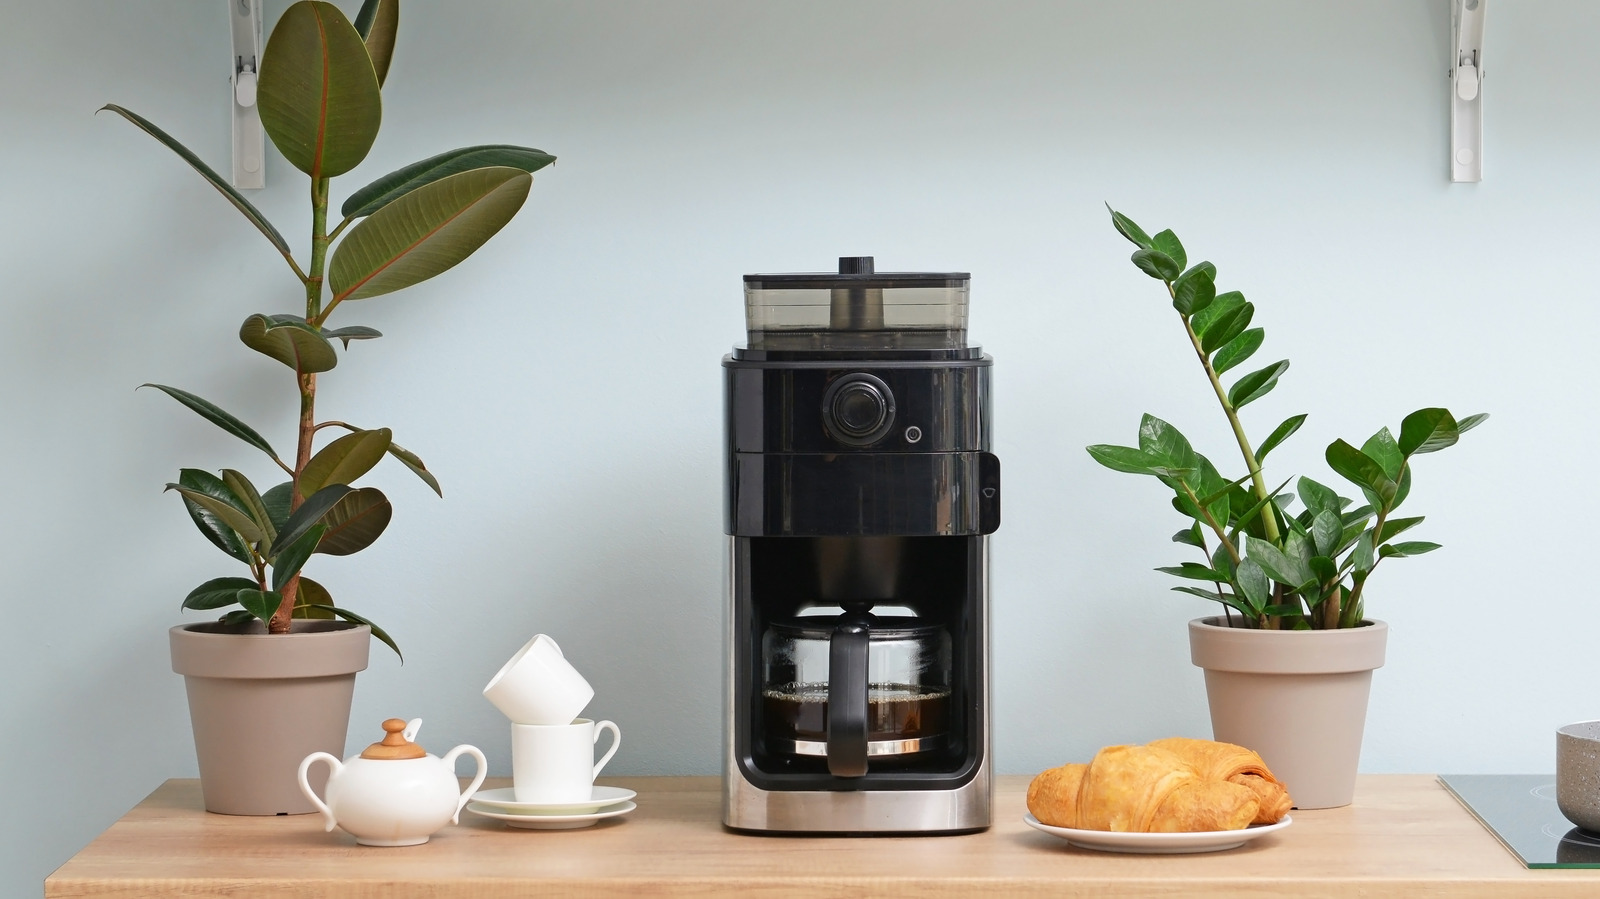 https://www.housedigest.com/img/gallery/throw-your-coffee-maker-away-immediately-if-you-notice-this/l-intro-1651063710.jpg